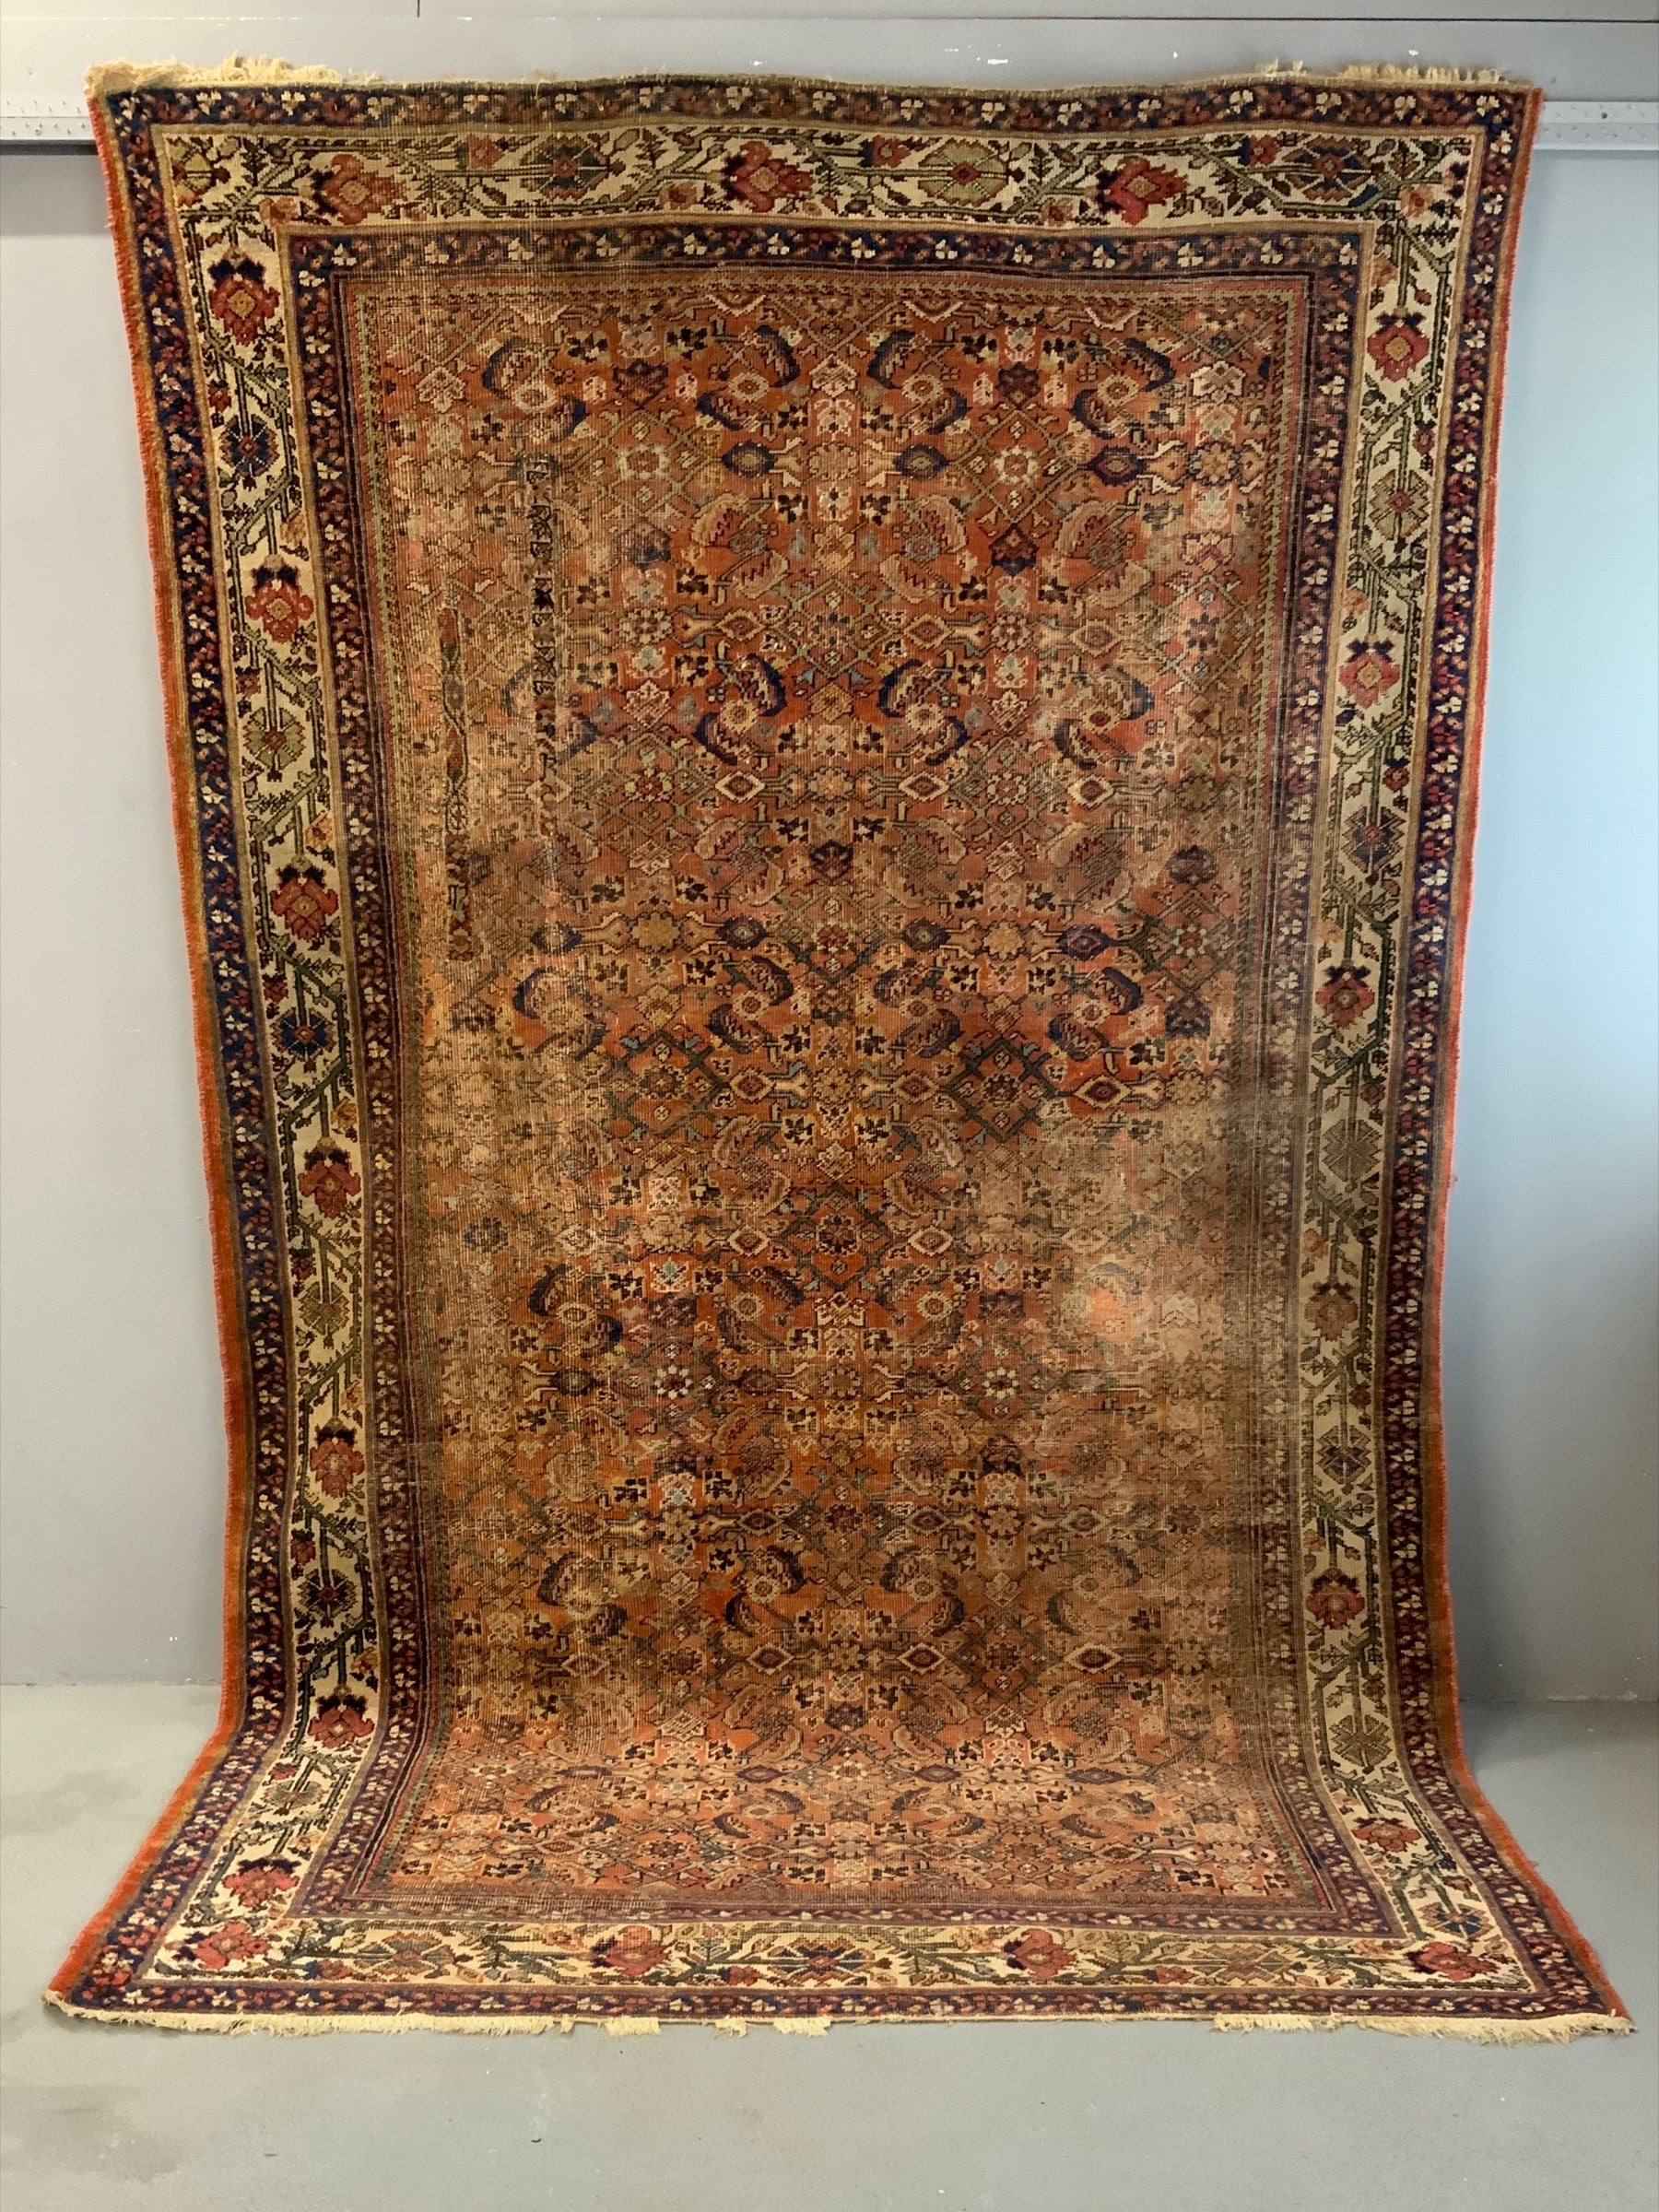 Sultanabad Feraghan Mahal small carpet (314 x 191cm)